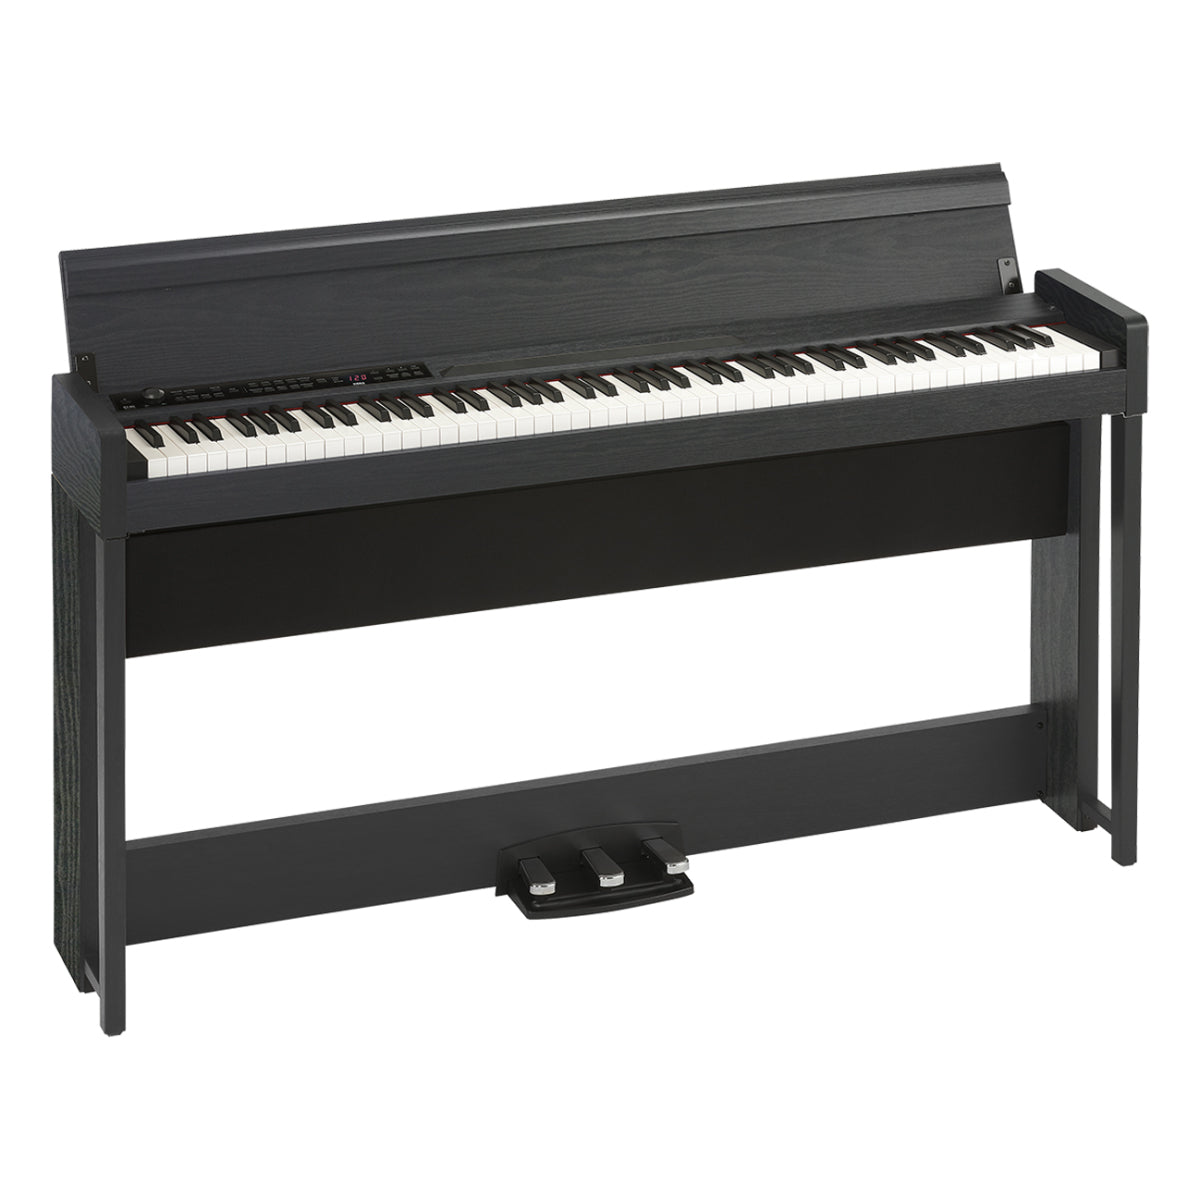 Korg C1 AIR Digital Piano with Bluetooth - Black Wood Stain